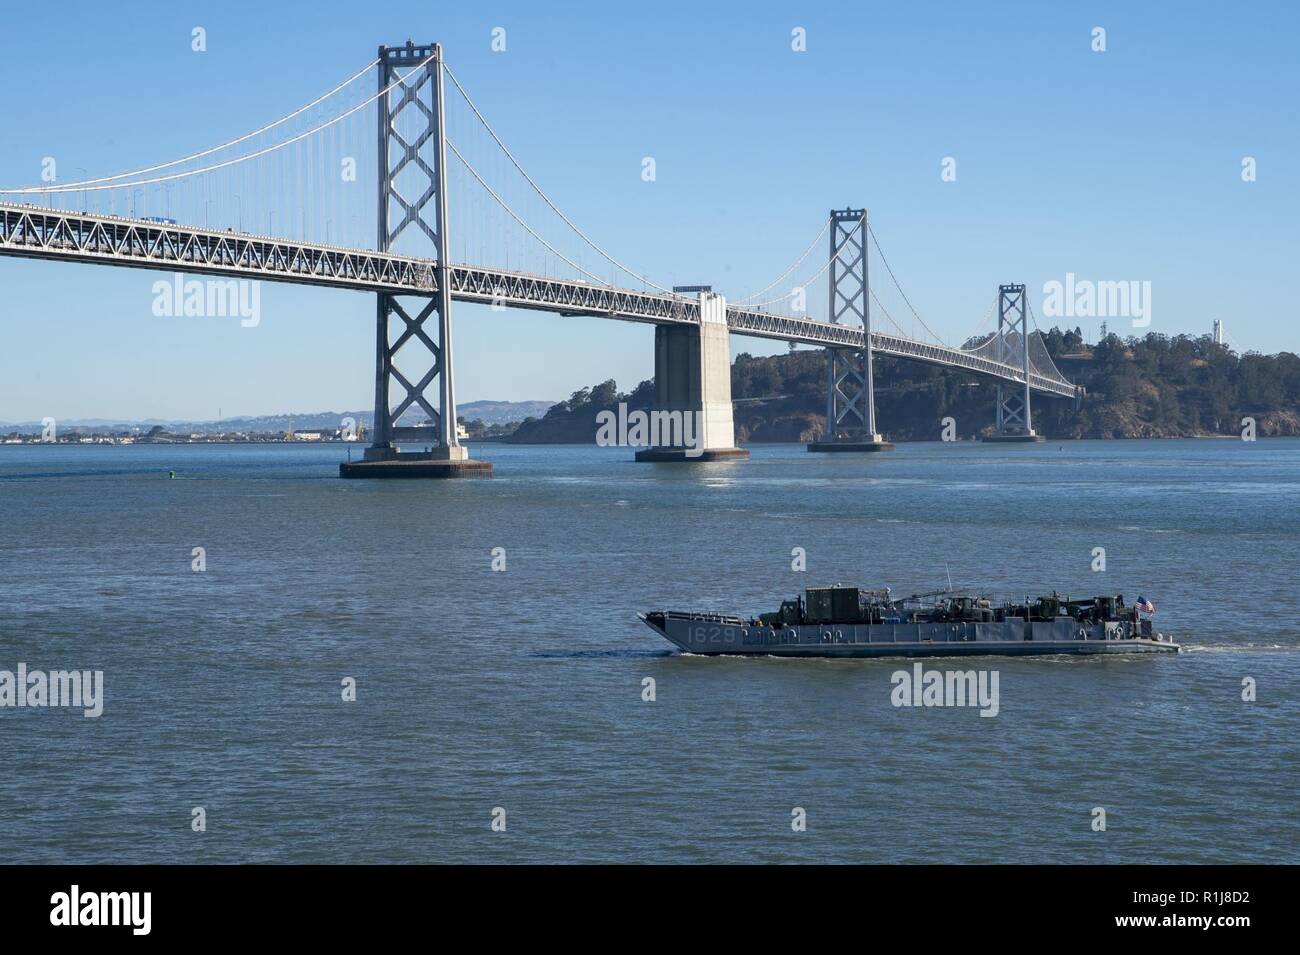 SAN FRANCISCO (Oct. 8, 2018) Landing Craft Utility (LCU) 1629, assigned to Beachmaster Unit (BMU) 1, navigates through the San Francisco Bay during San Francisco Fleet Week 2018. San Francisco Fleet Week is an opportunity for the American public to meet their Navy, Marine Corps and Coast Guard teams and experience America’s sea services. During fleet week, service members participate in various community service events, showcase capabilities and equipment to the community, and enjoy the hospitality of San Francisco and its surrounding areas. Stock Photo